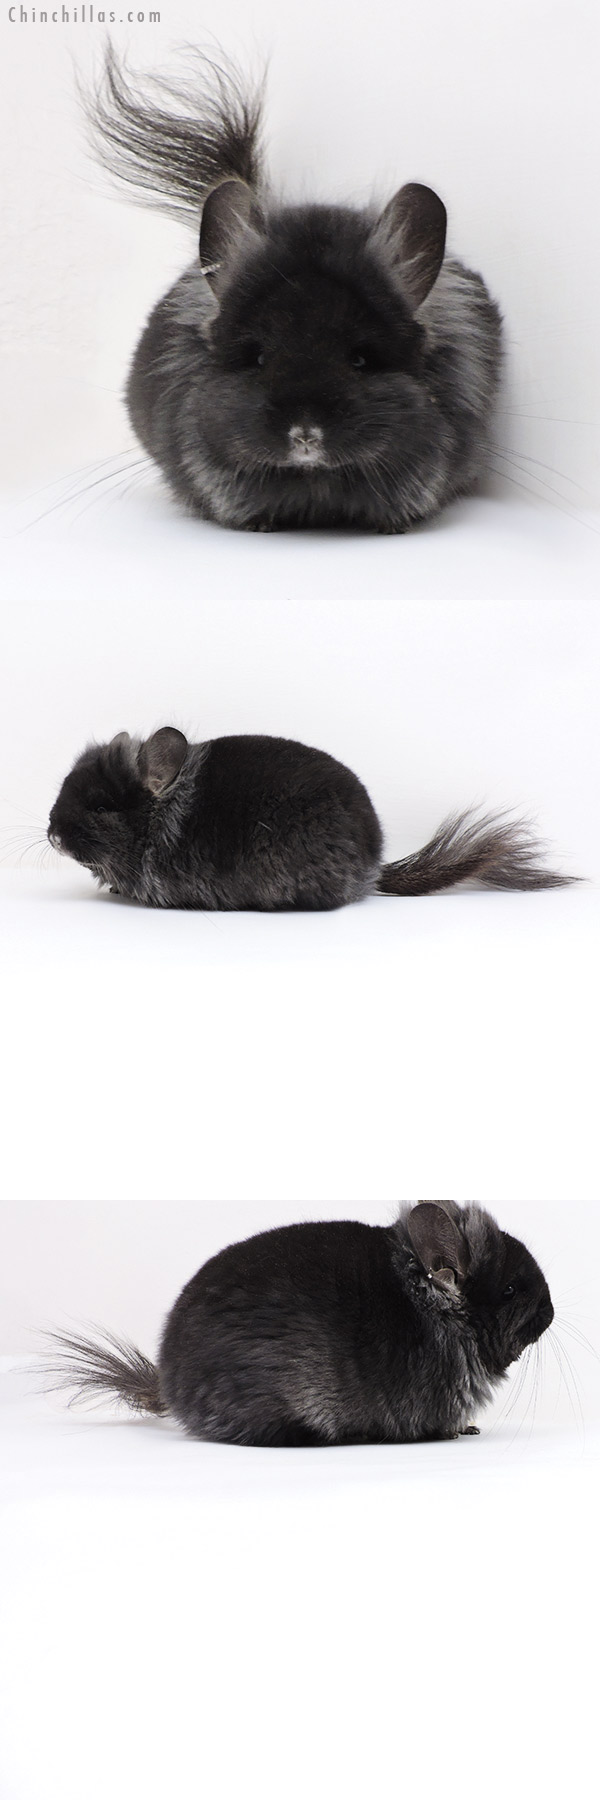 Chinchilla or related item offered for sale or export on Chinchillas.com - 18009 Exceptional Ebony  Royal Persian Angora Female Chinchilla with Lion Mane and Ear Tufts